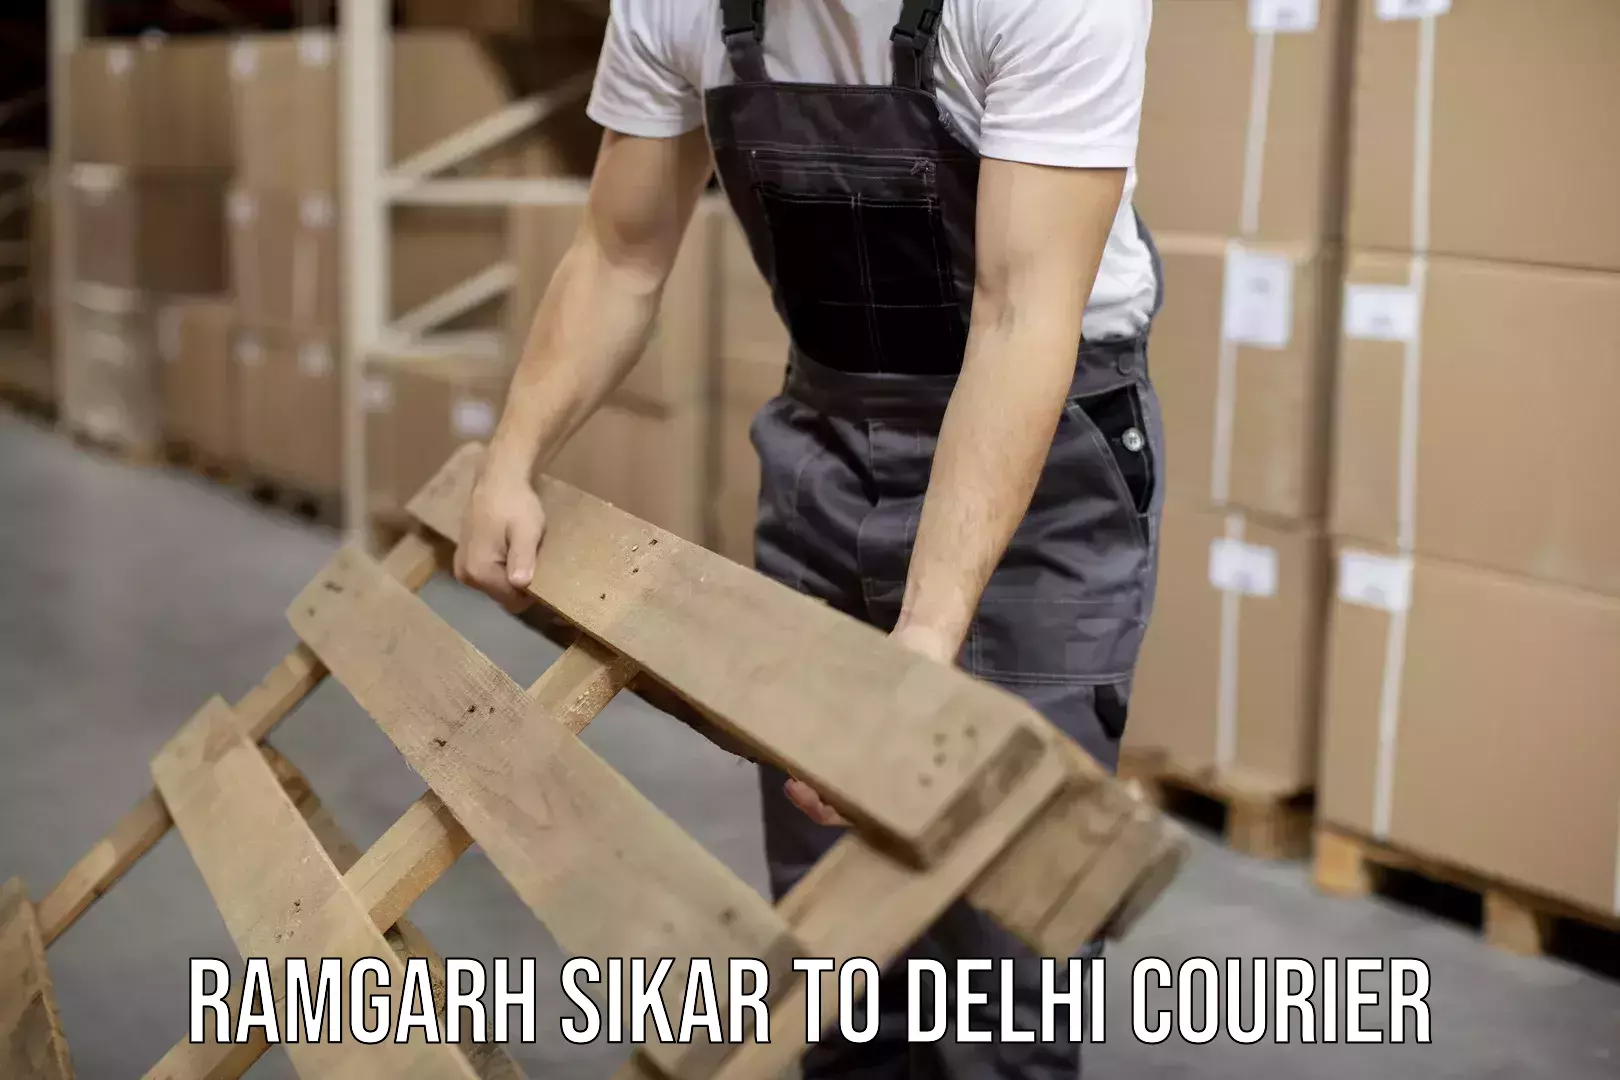 Easy access courier services in Ramgarh Sikar to East Delhi